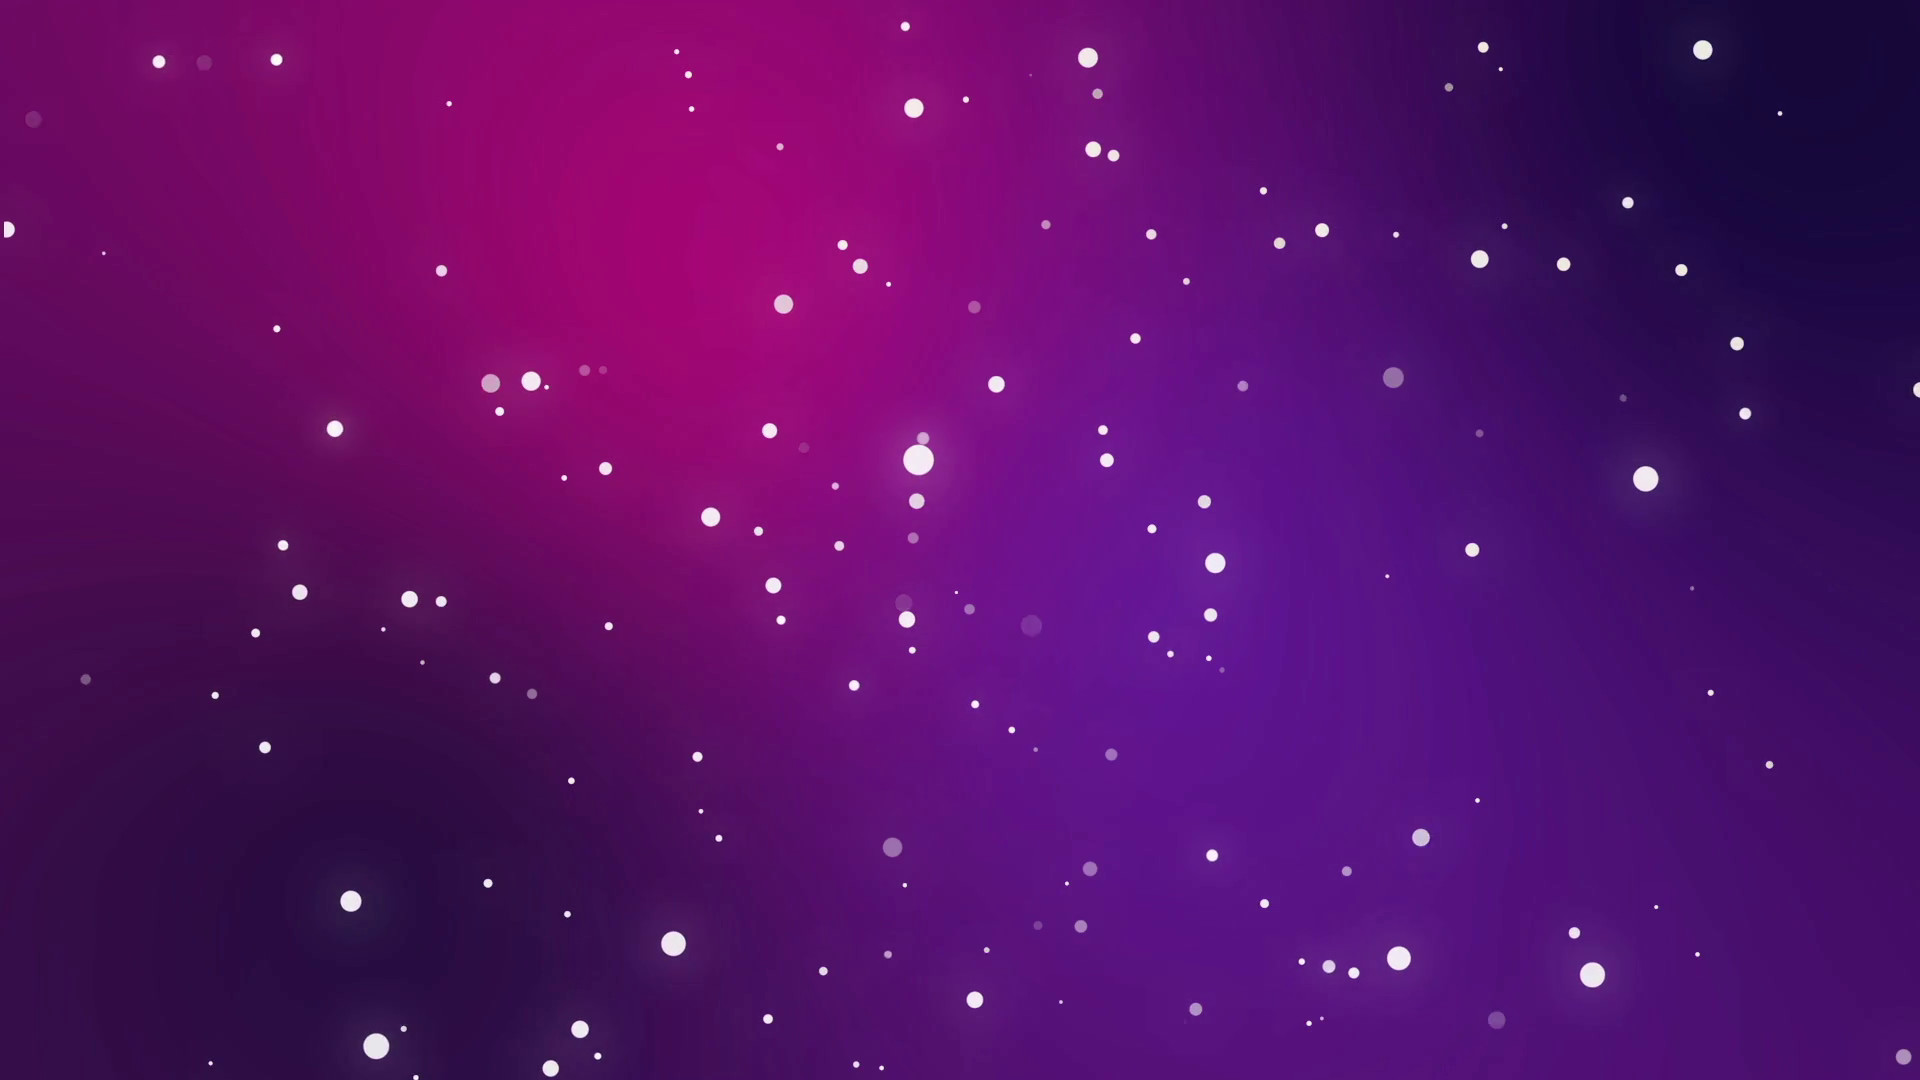 1920x1080 Night sky full of stars animation made of sparkly light dot particles  moving across a purple